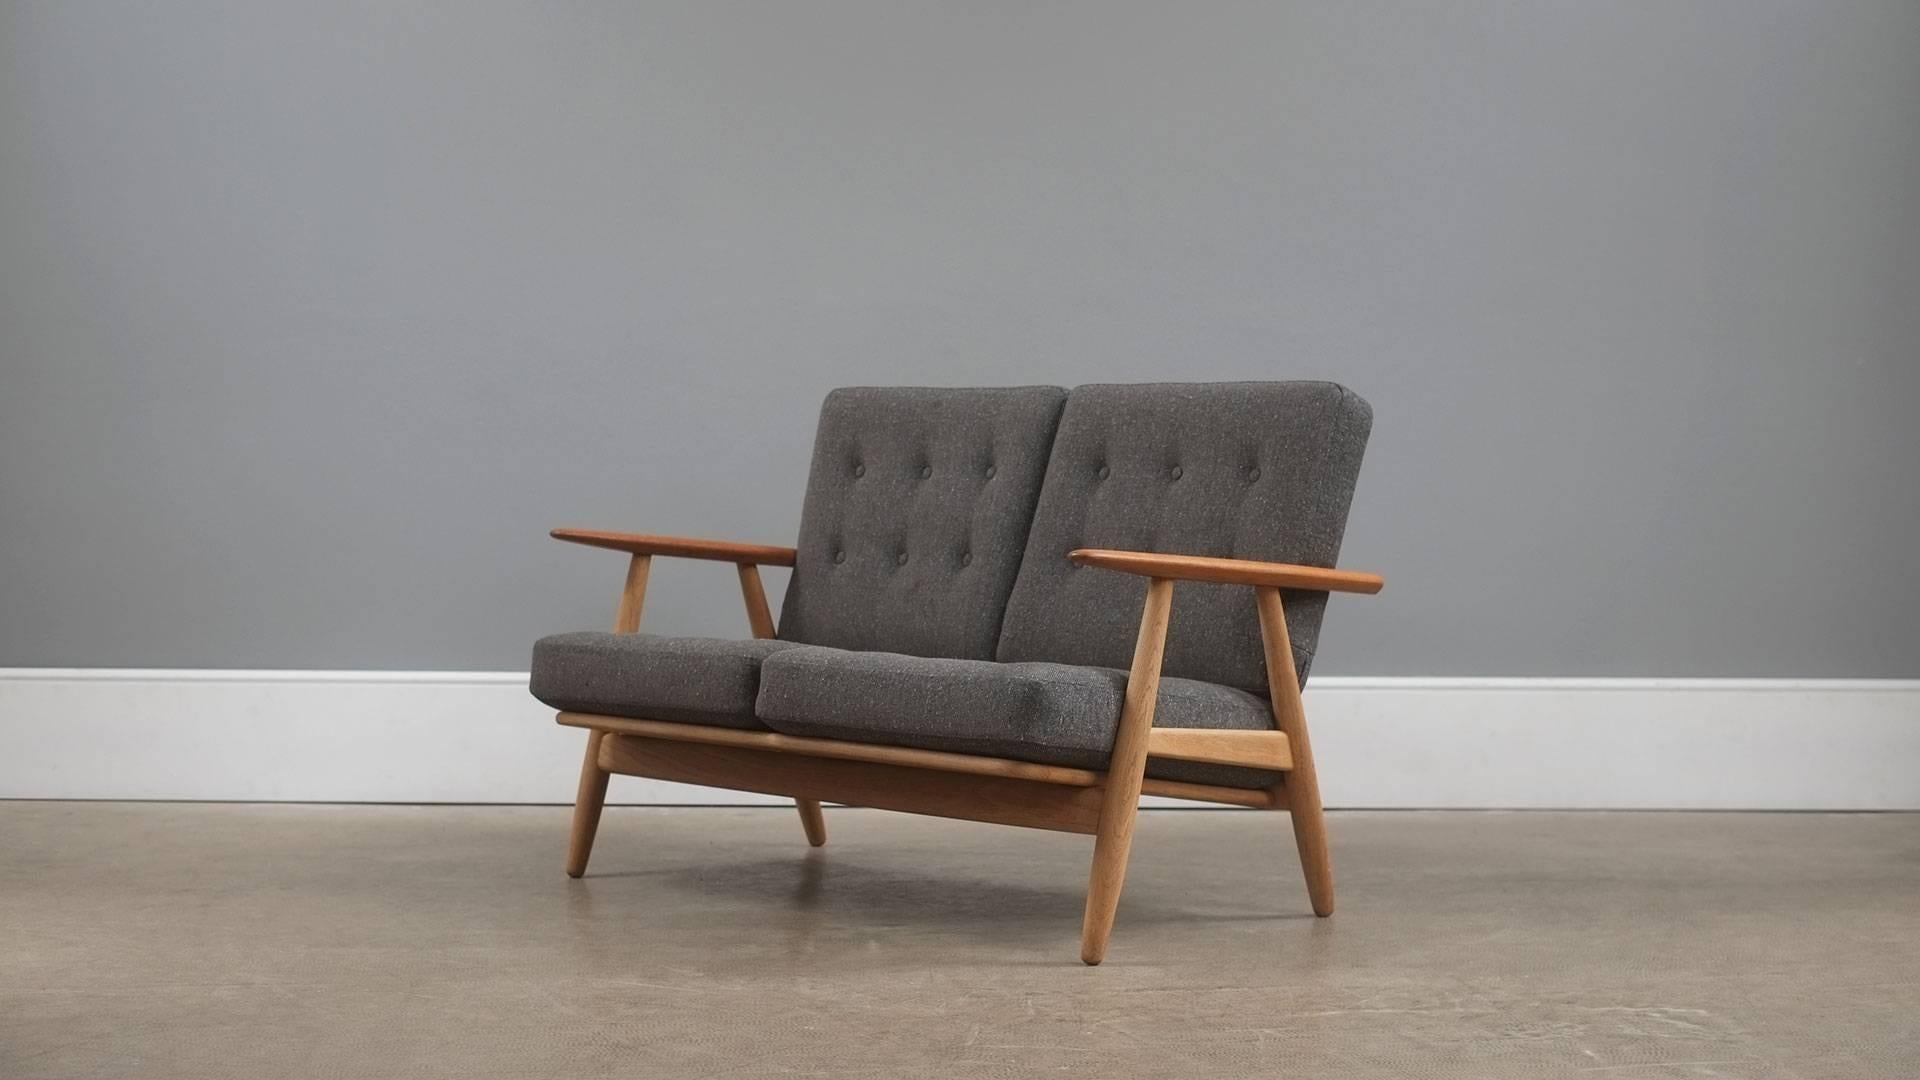 Beautiful GE240 two seat Cigar sofa in solid oak with contrasting teak arms designed by Hans Wegner for Getama, Denmark. Refurbished original sprung cushions with beautiful new fleck upholstery. 